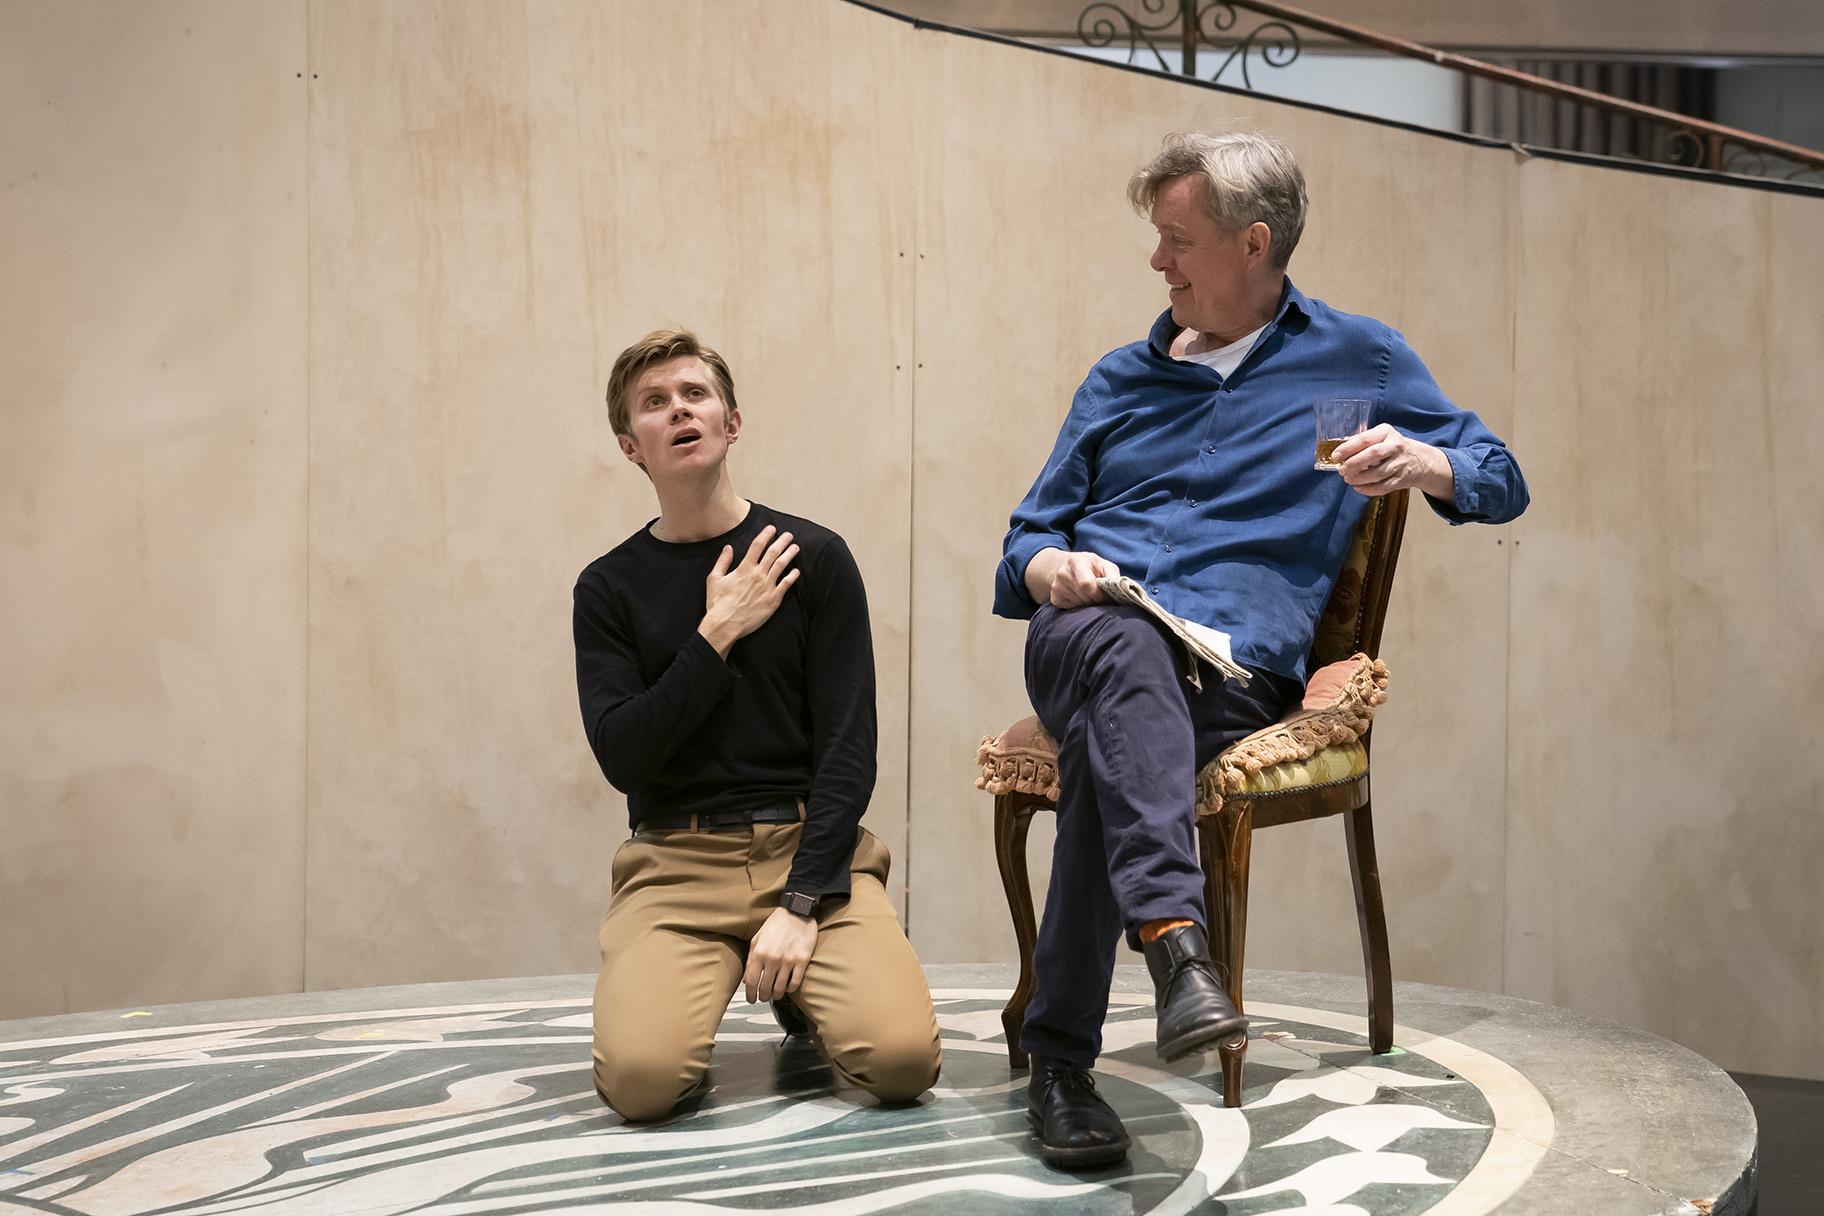 Rob Houchen and Alex Jennings in rehearsal for the Scenario Two production of “The Light in the Piazza” at Lyric Opera House. (Photo by Liz Lauren)